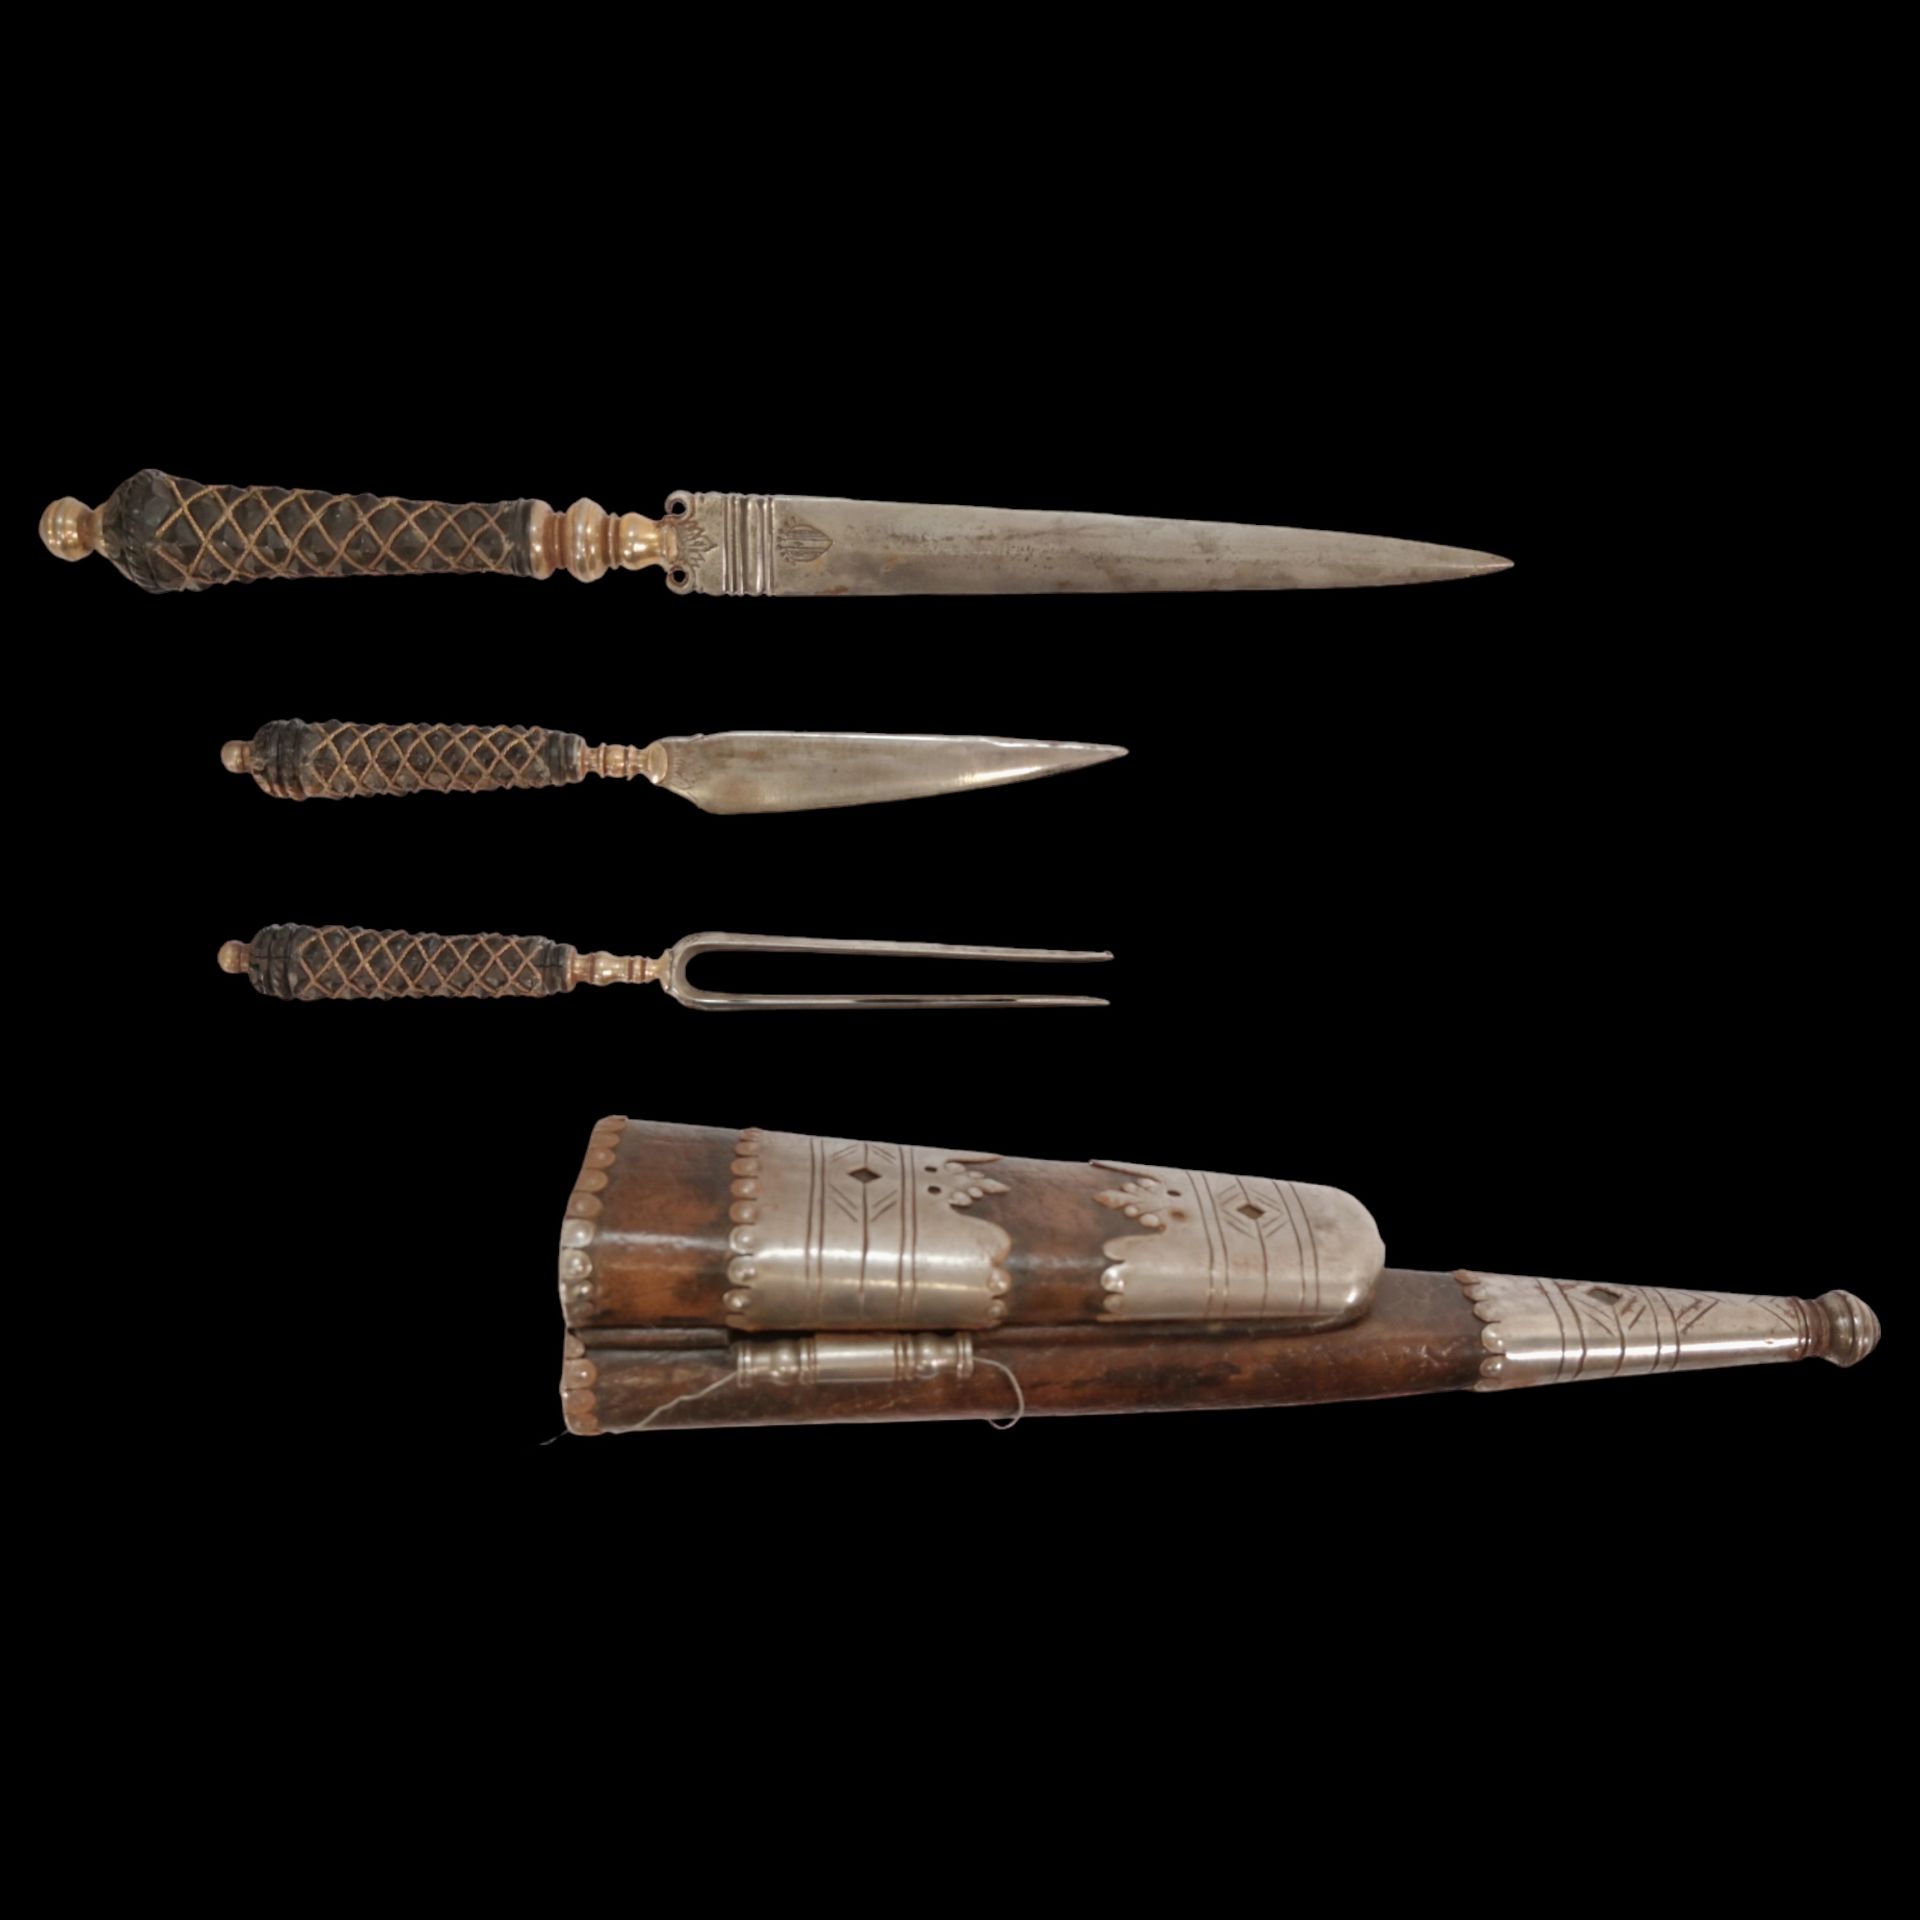 Set of French hunting cutlery from the 18th century.